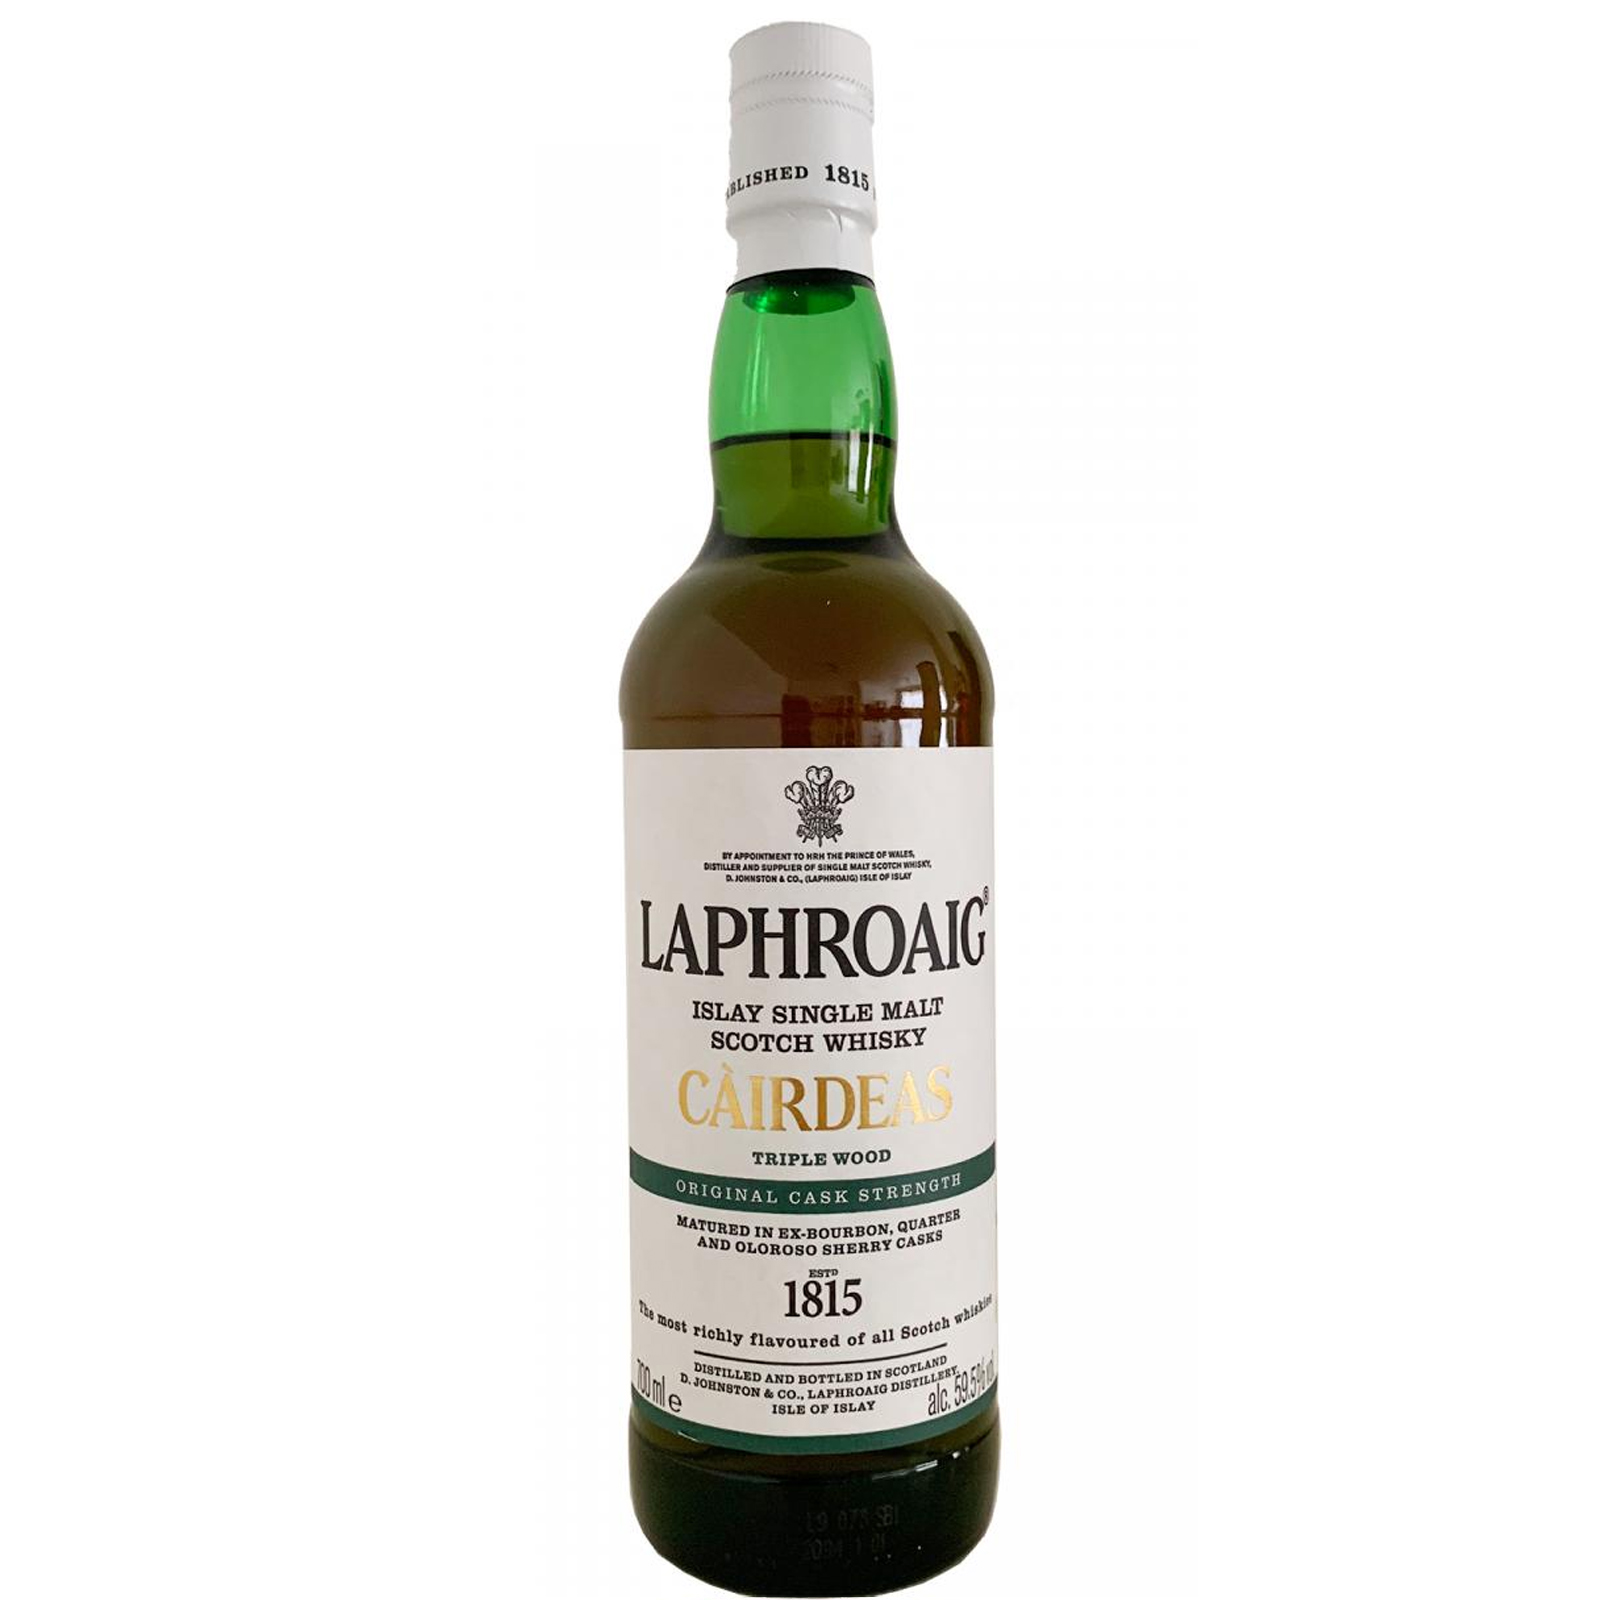 You are currently viewing Laphroaig Cairdeas Triple Wood